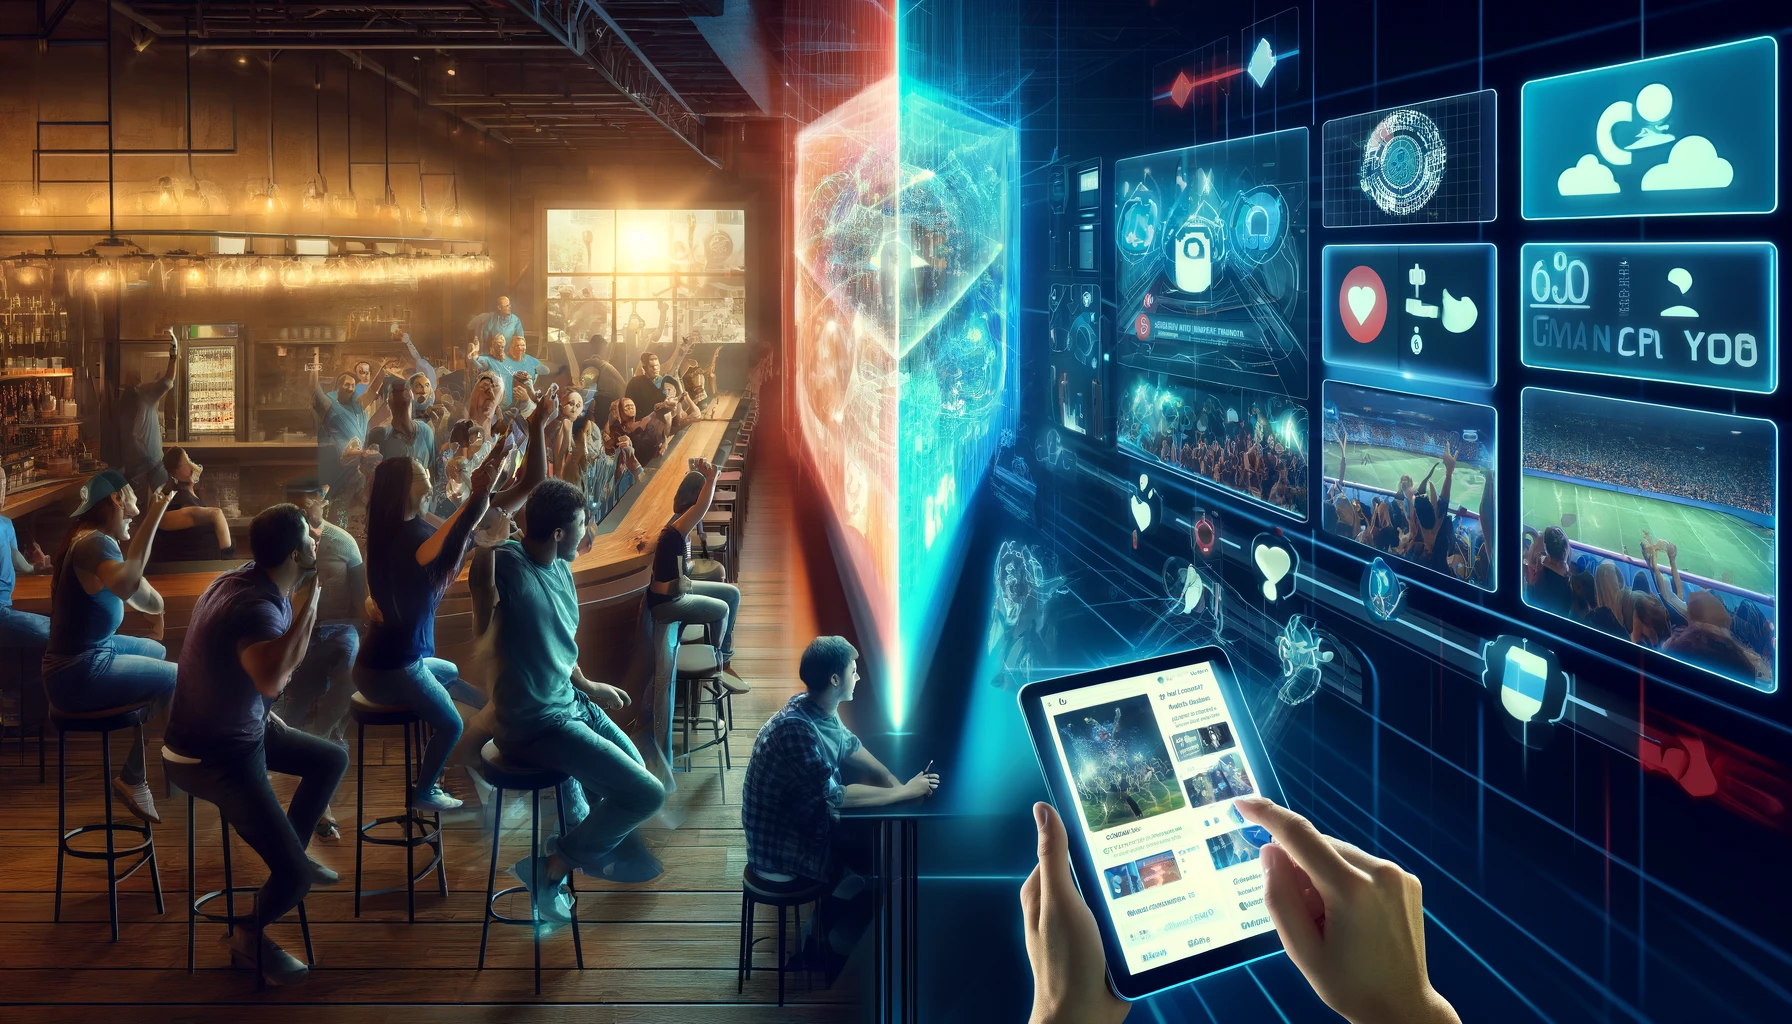 Futuristic sports bar with patrons cheering at a holographic screen and interacting via tablets with a social media-connected experience.